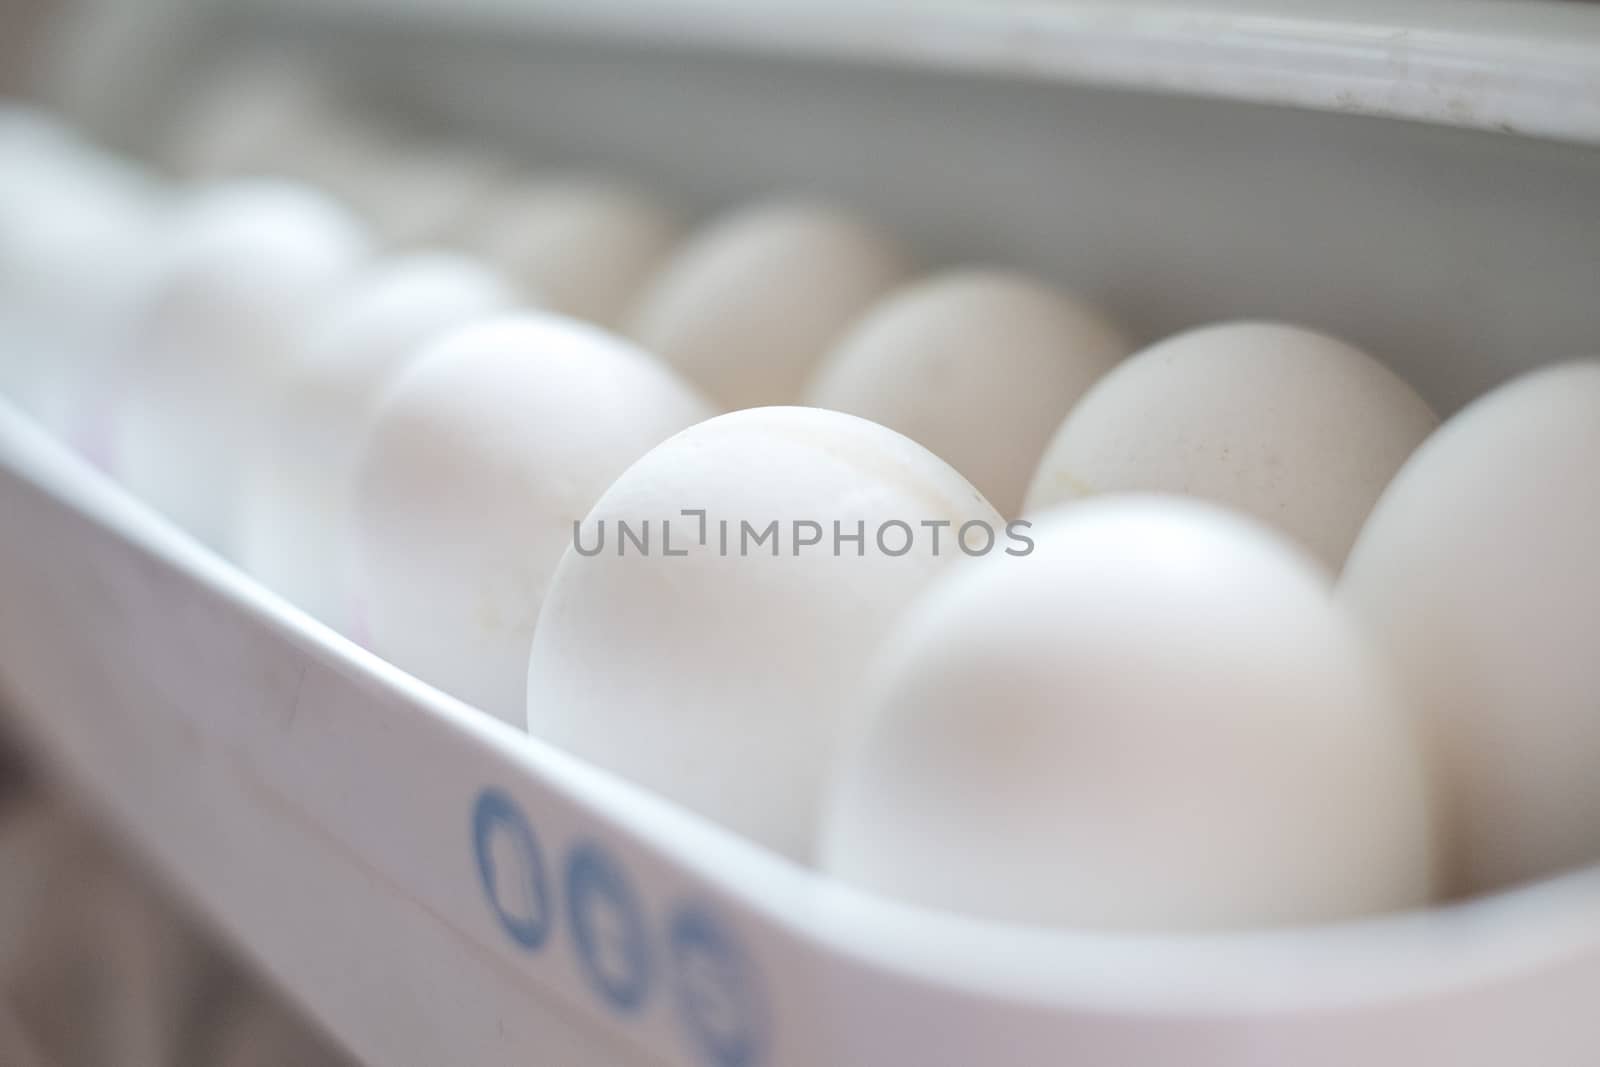 Crude eggs lie in the refrigerator